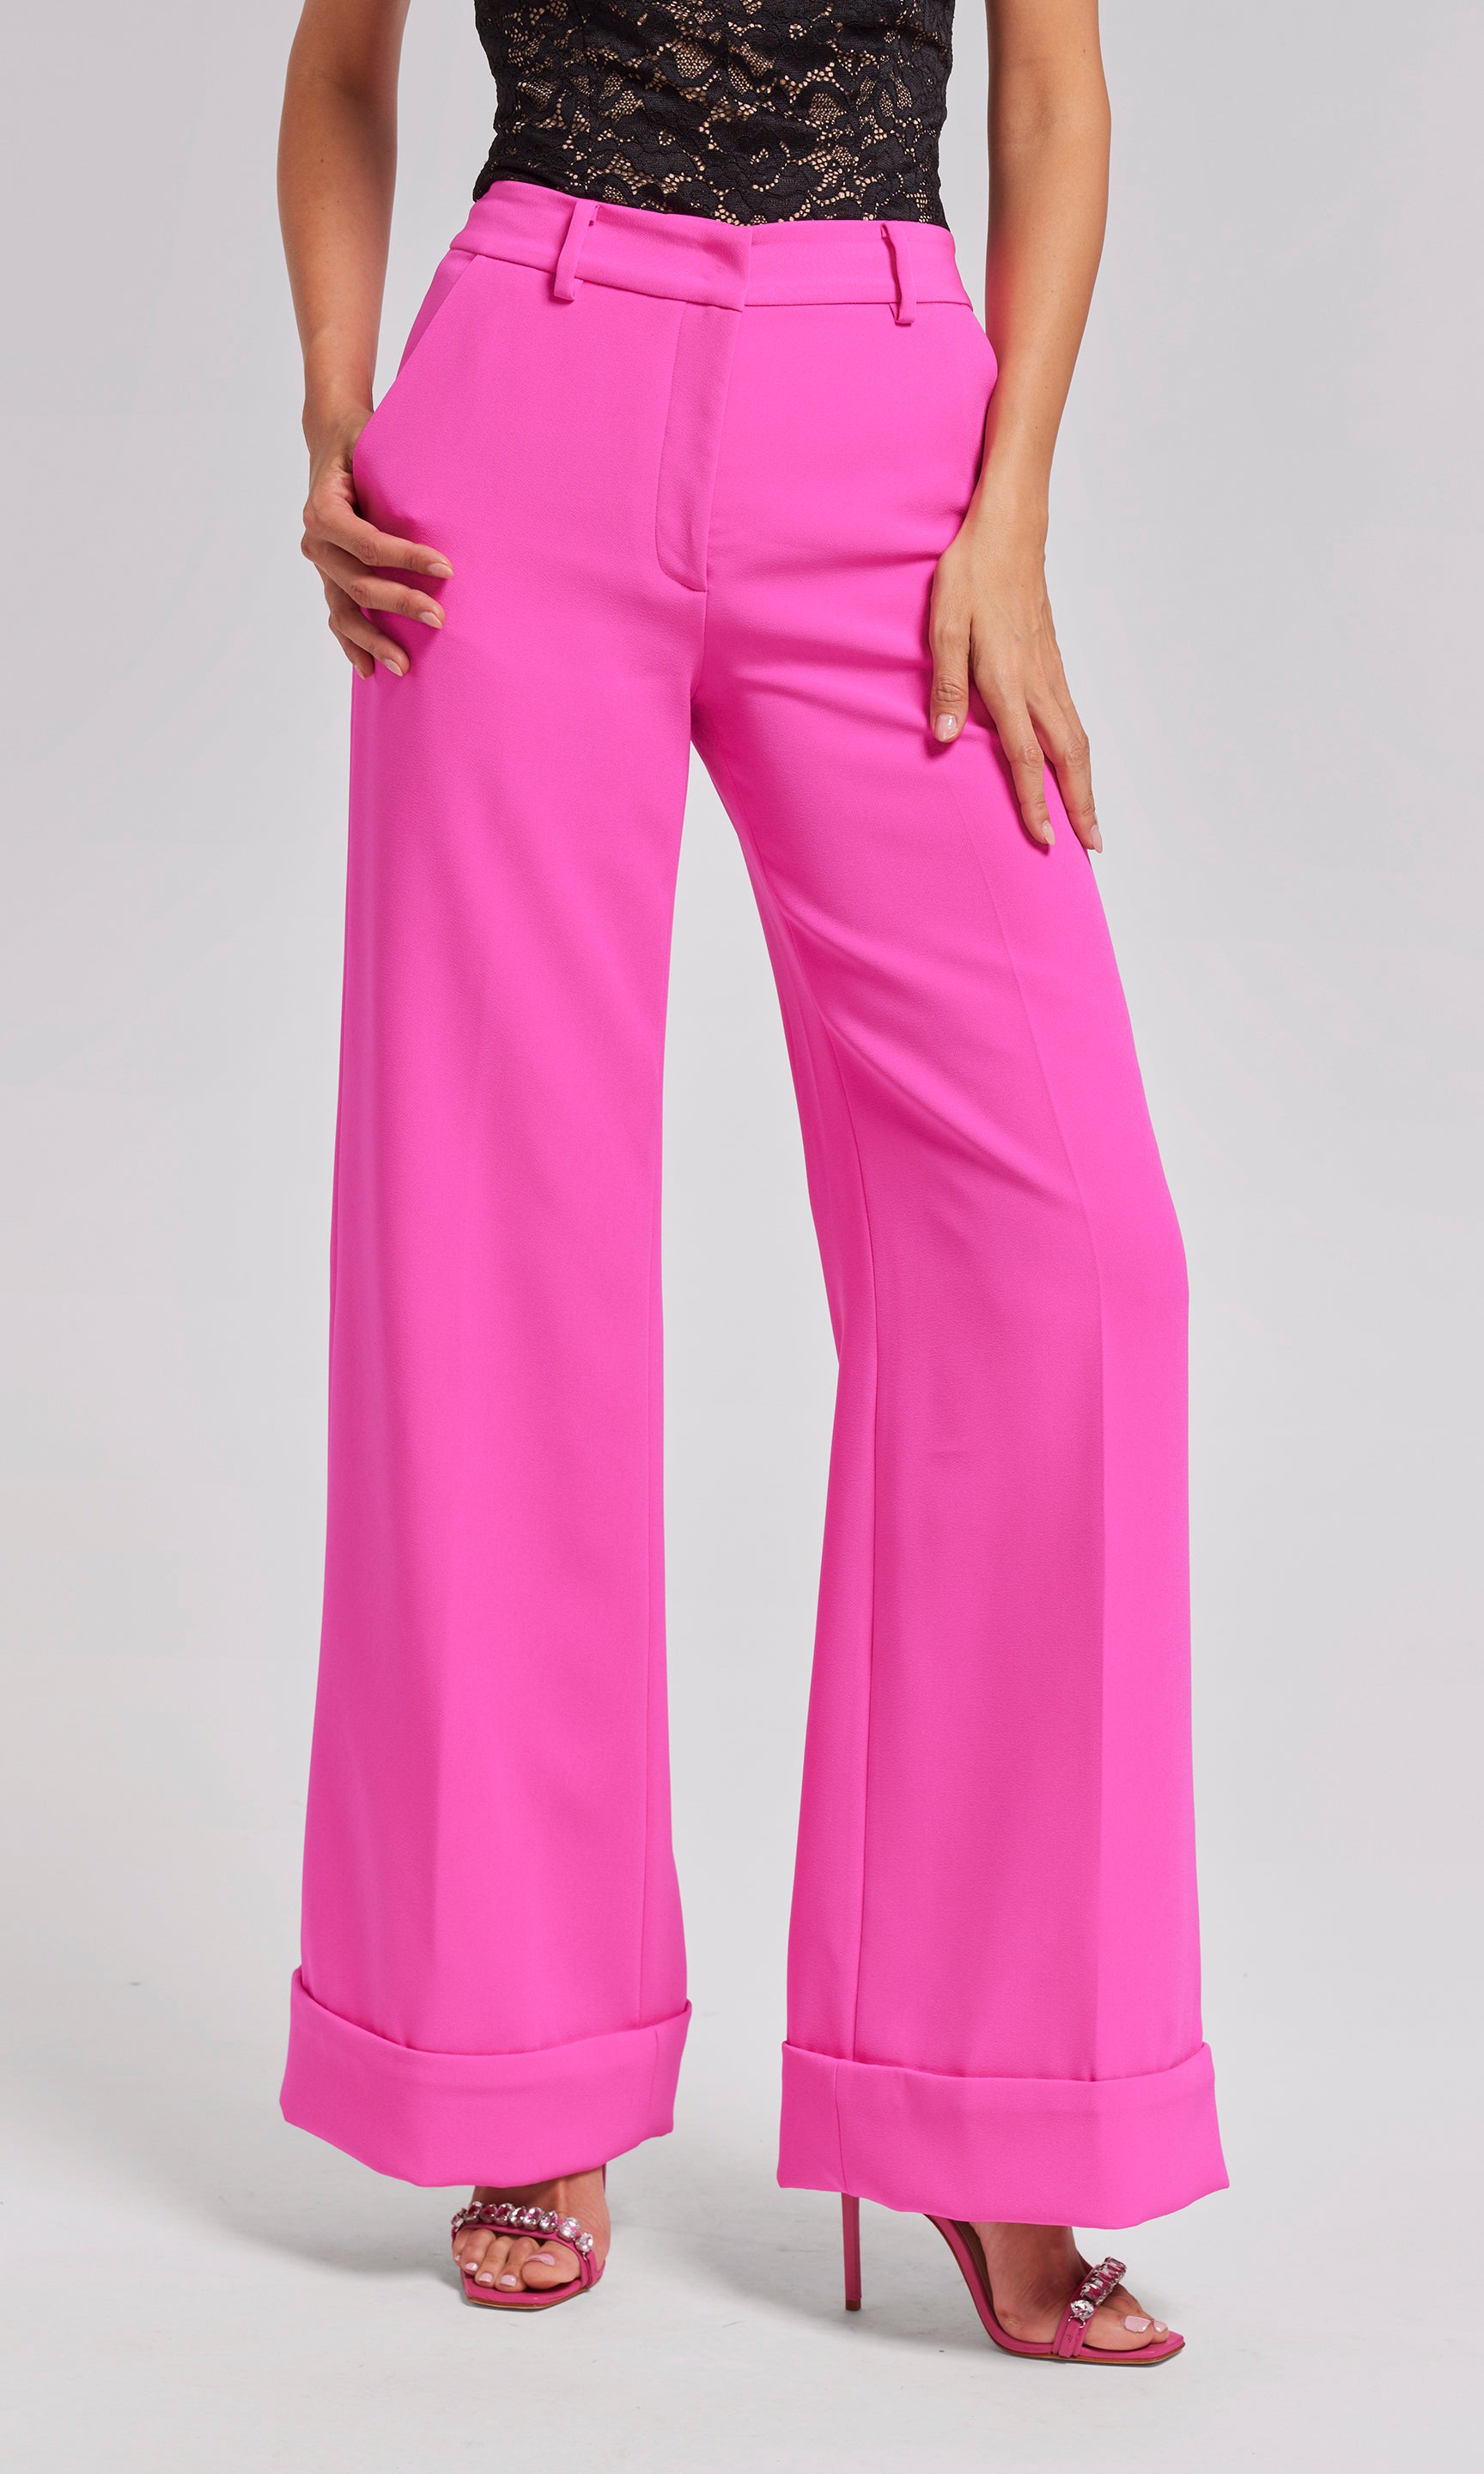 Bold and Classy Mauve Pink High-Waisted Wide Leg Trouser Pants